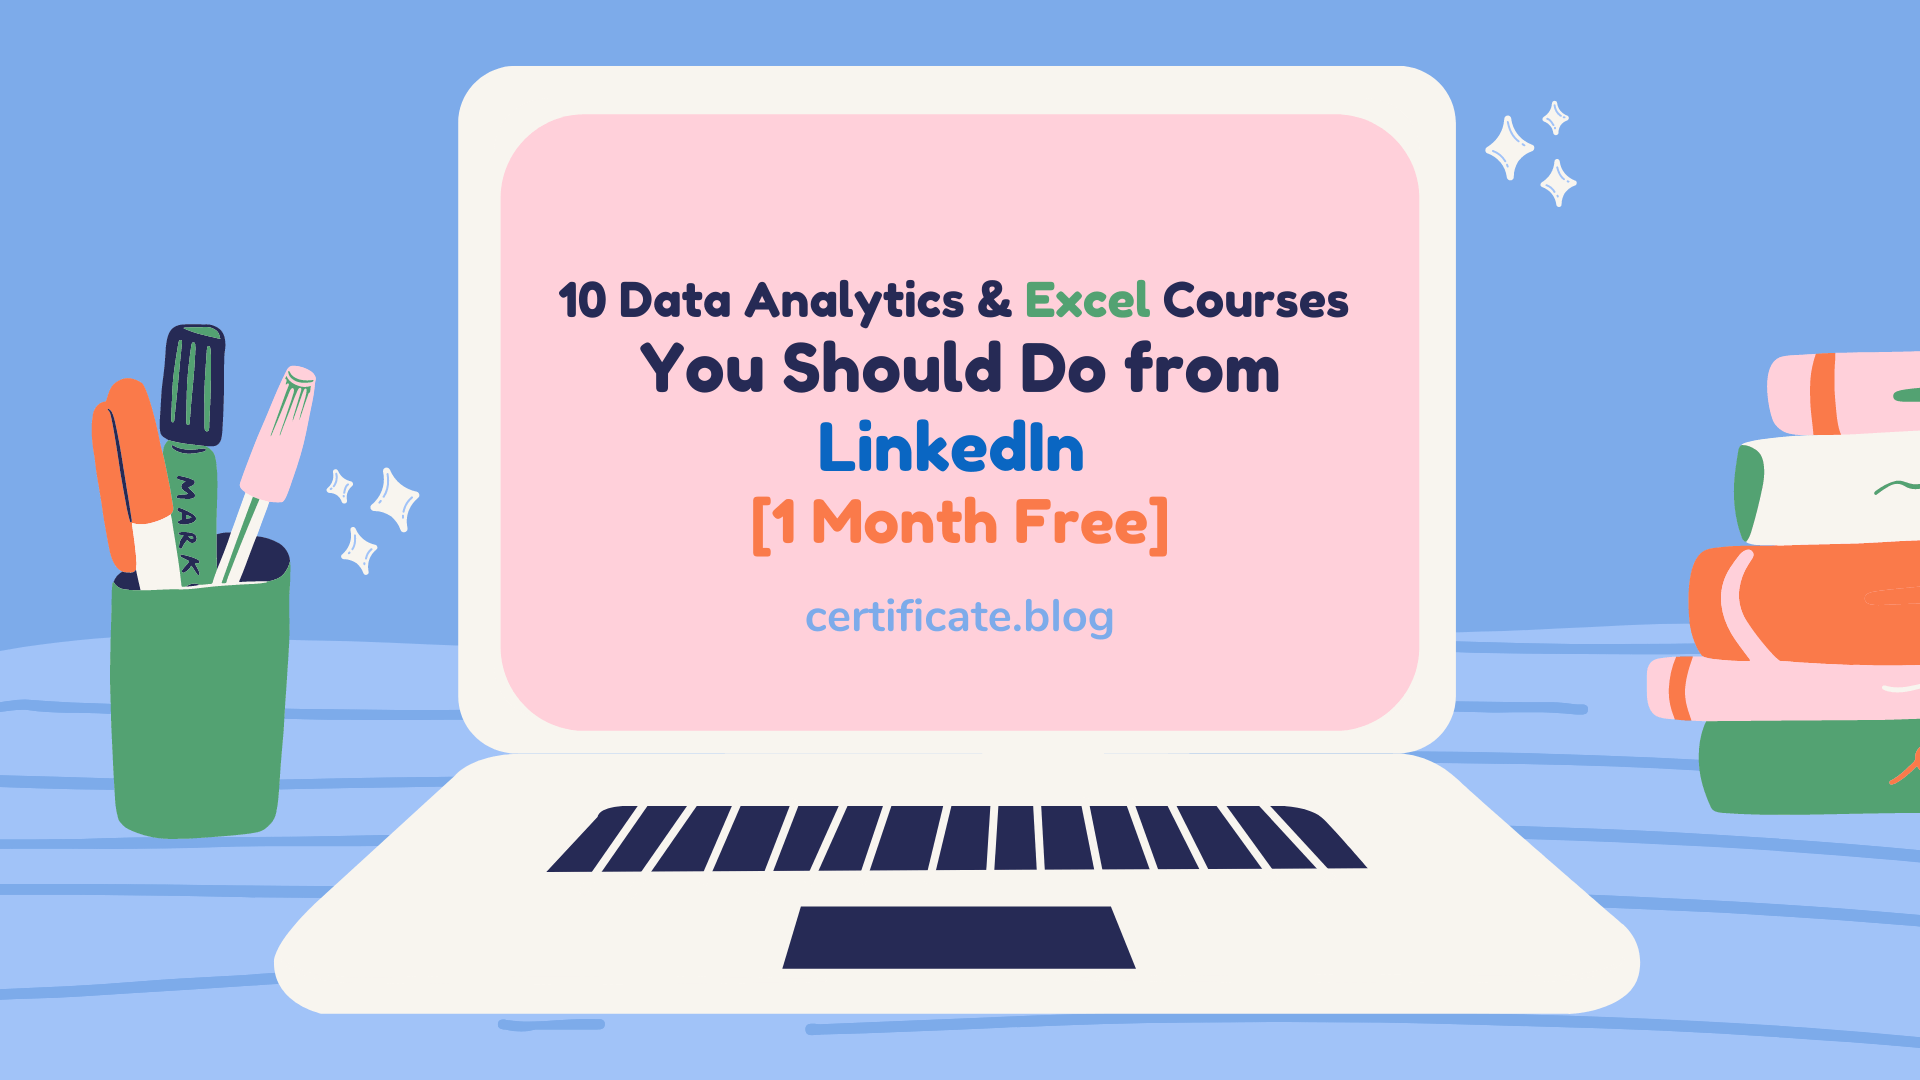 10 Data Analytics & Excel Courses You Should Do From LinkedIn [1 Month Free]